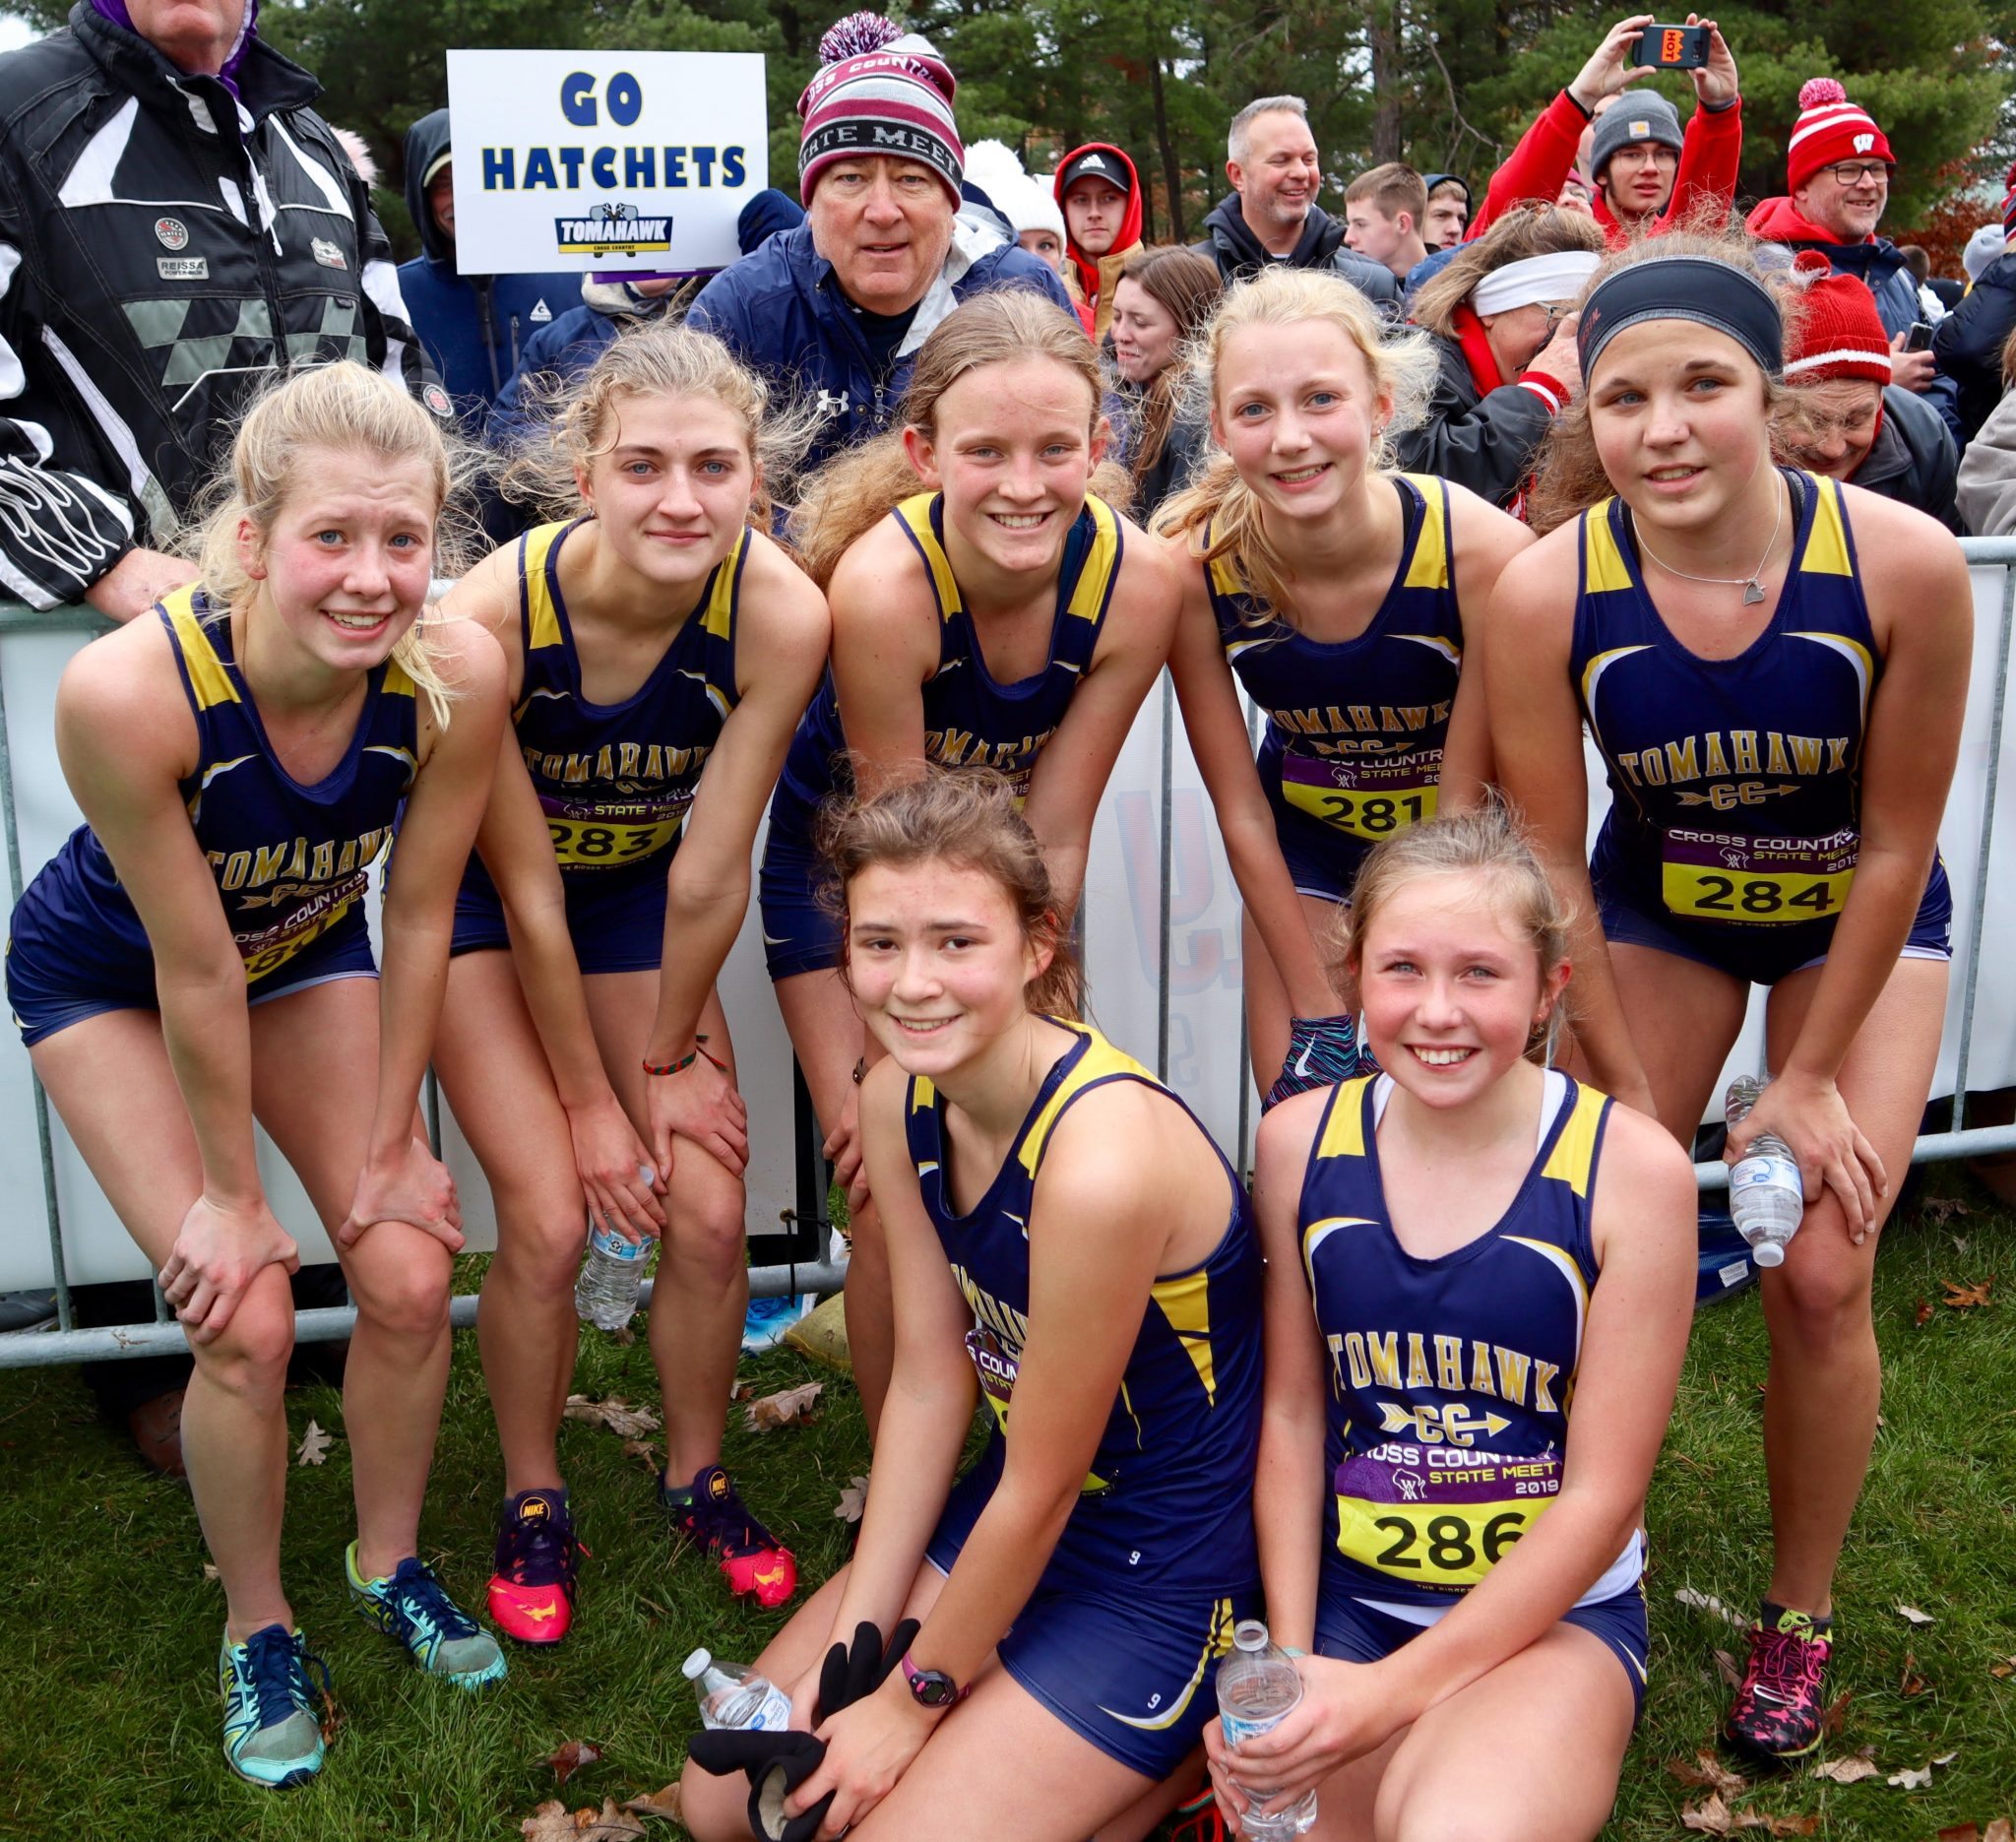 Lady Hatchets finish season with 9th place finish at D2 State Championships: Noah Buckwalter represents boys’ team in Wisconsin Rapids with 17:26 5K